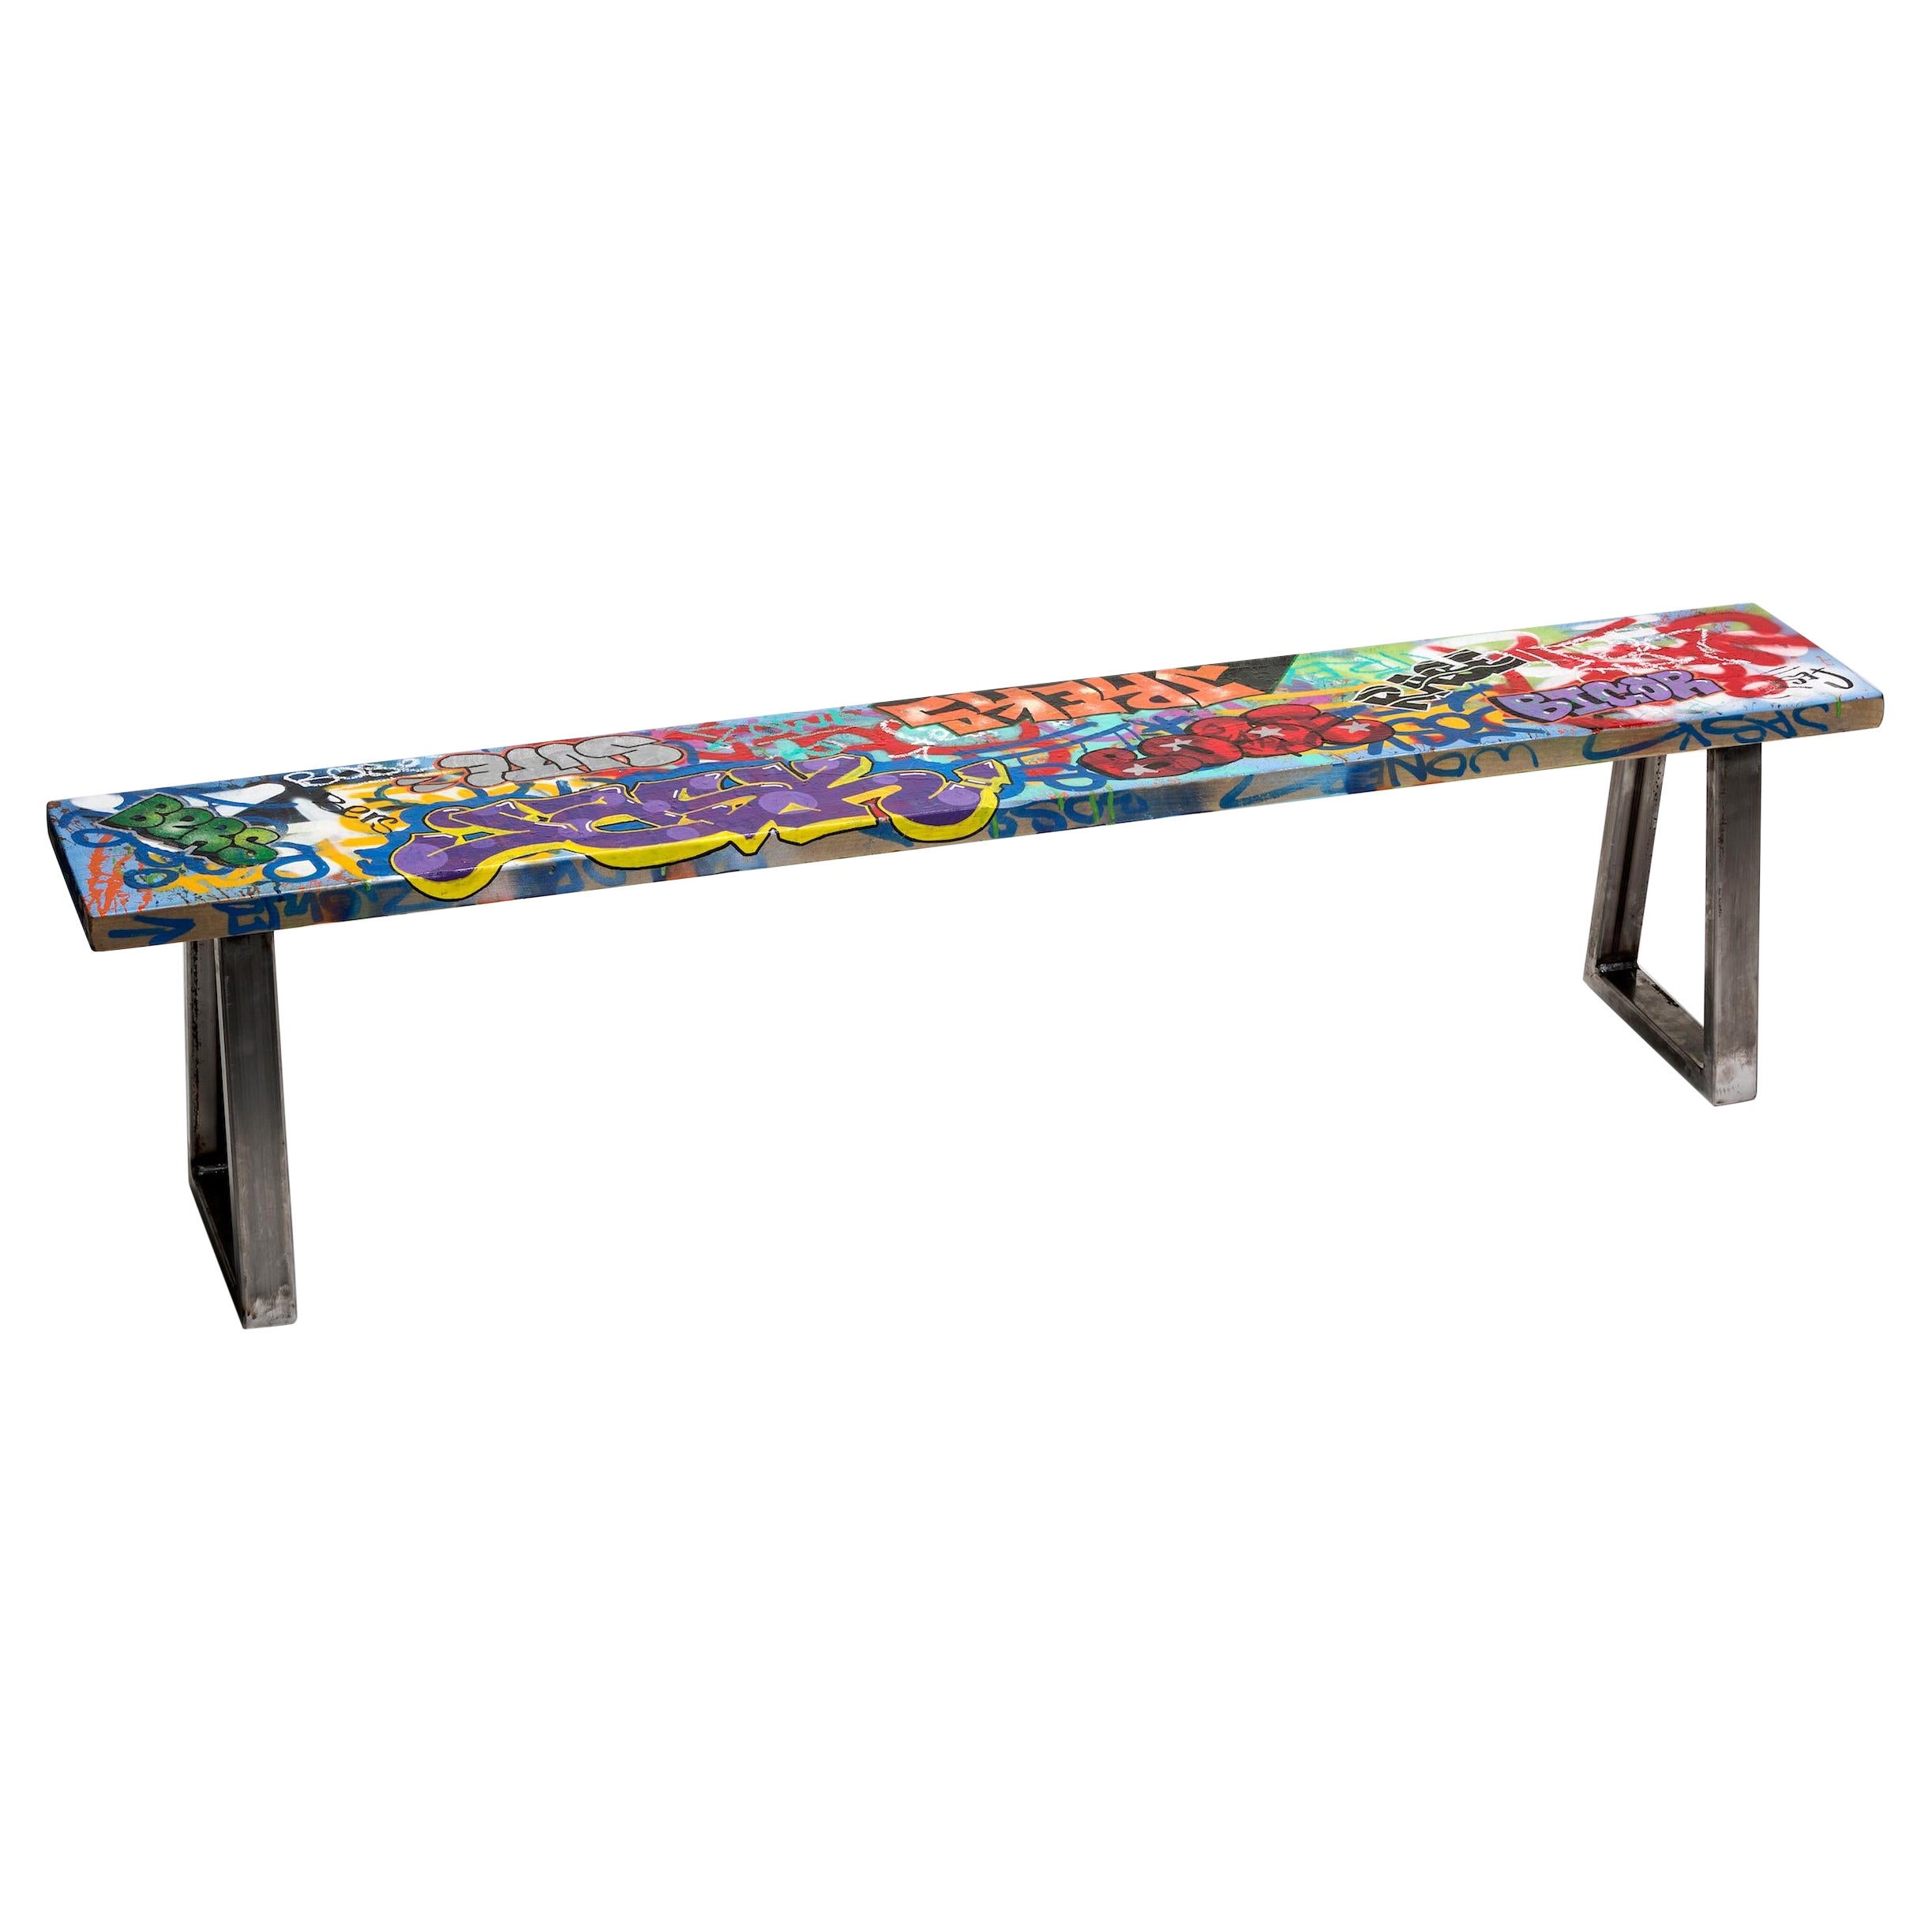 Large Colorful Graffiti Tagged Wood Bench For Sale